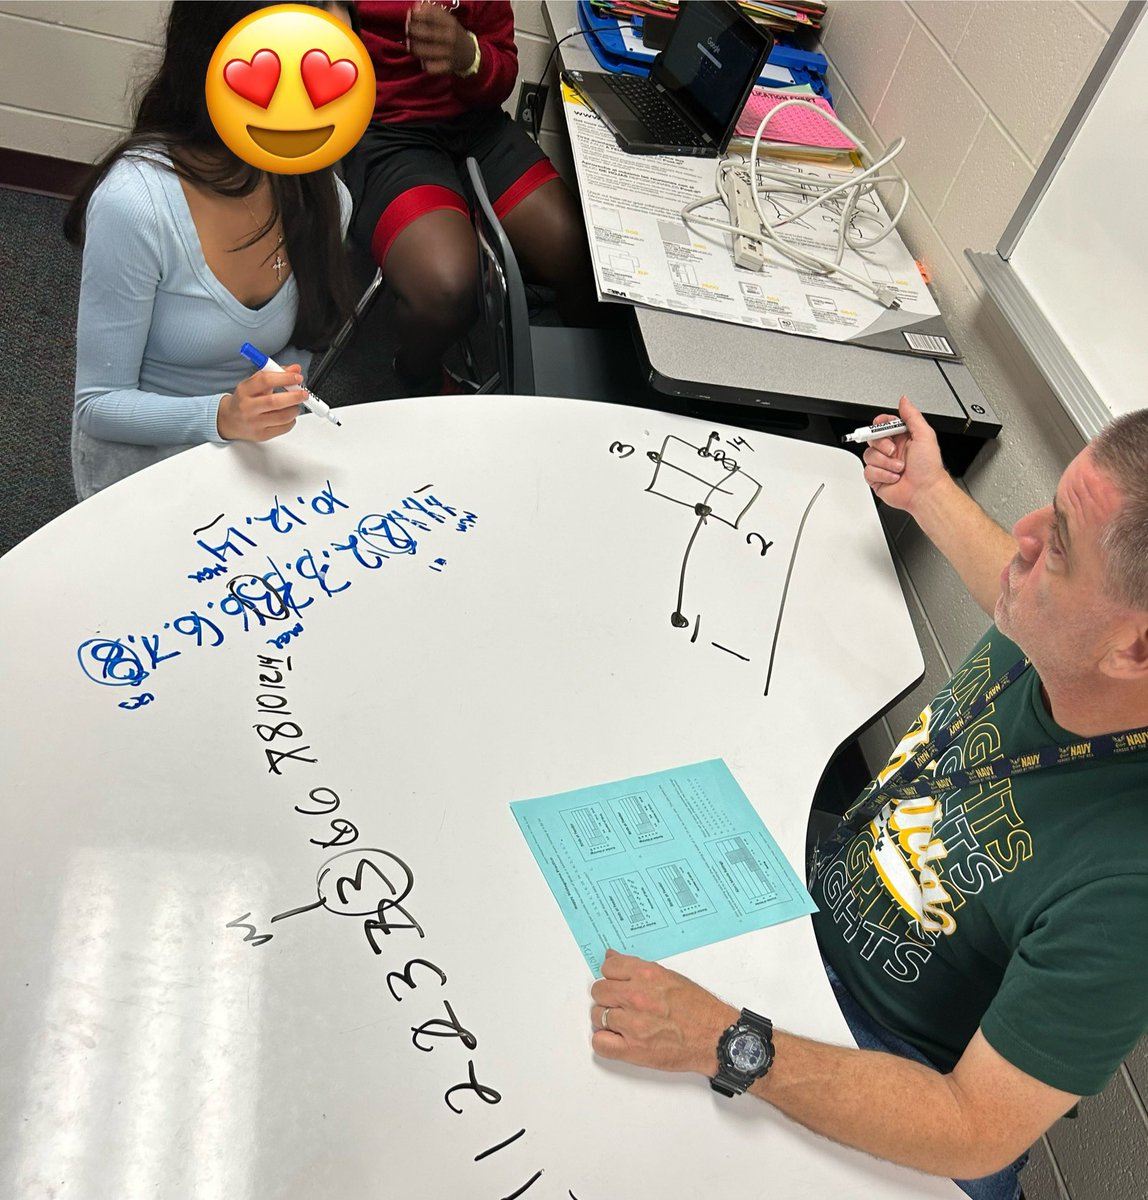 Shoutout to Mr. Barnes @kahlams for seeing the #value in the POWER of getting up close and personal with struggling students! #smallgroups #oneonone @cfisdmath